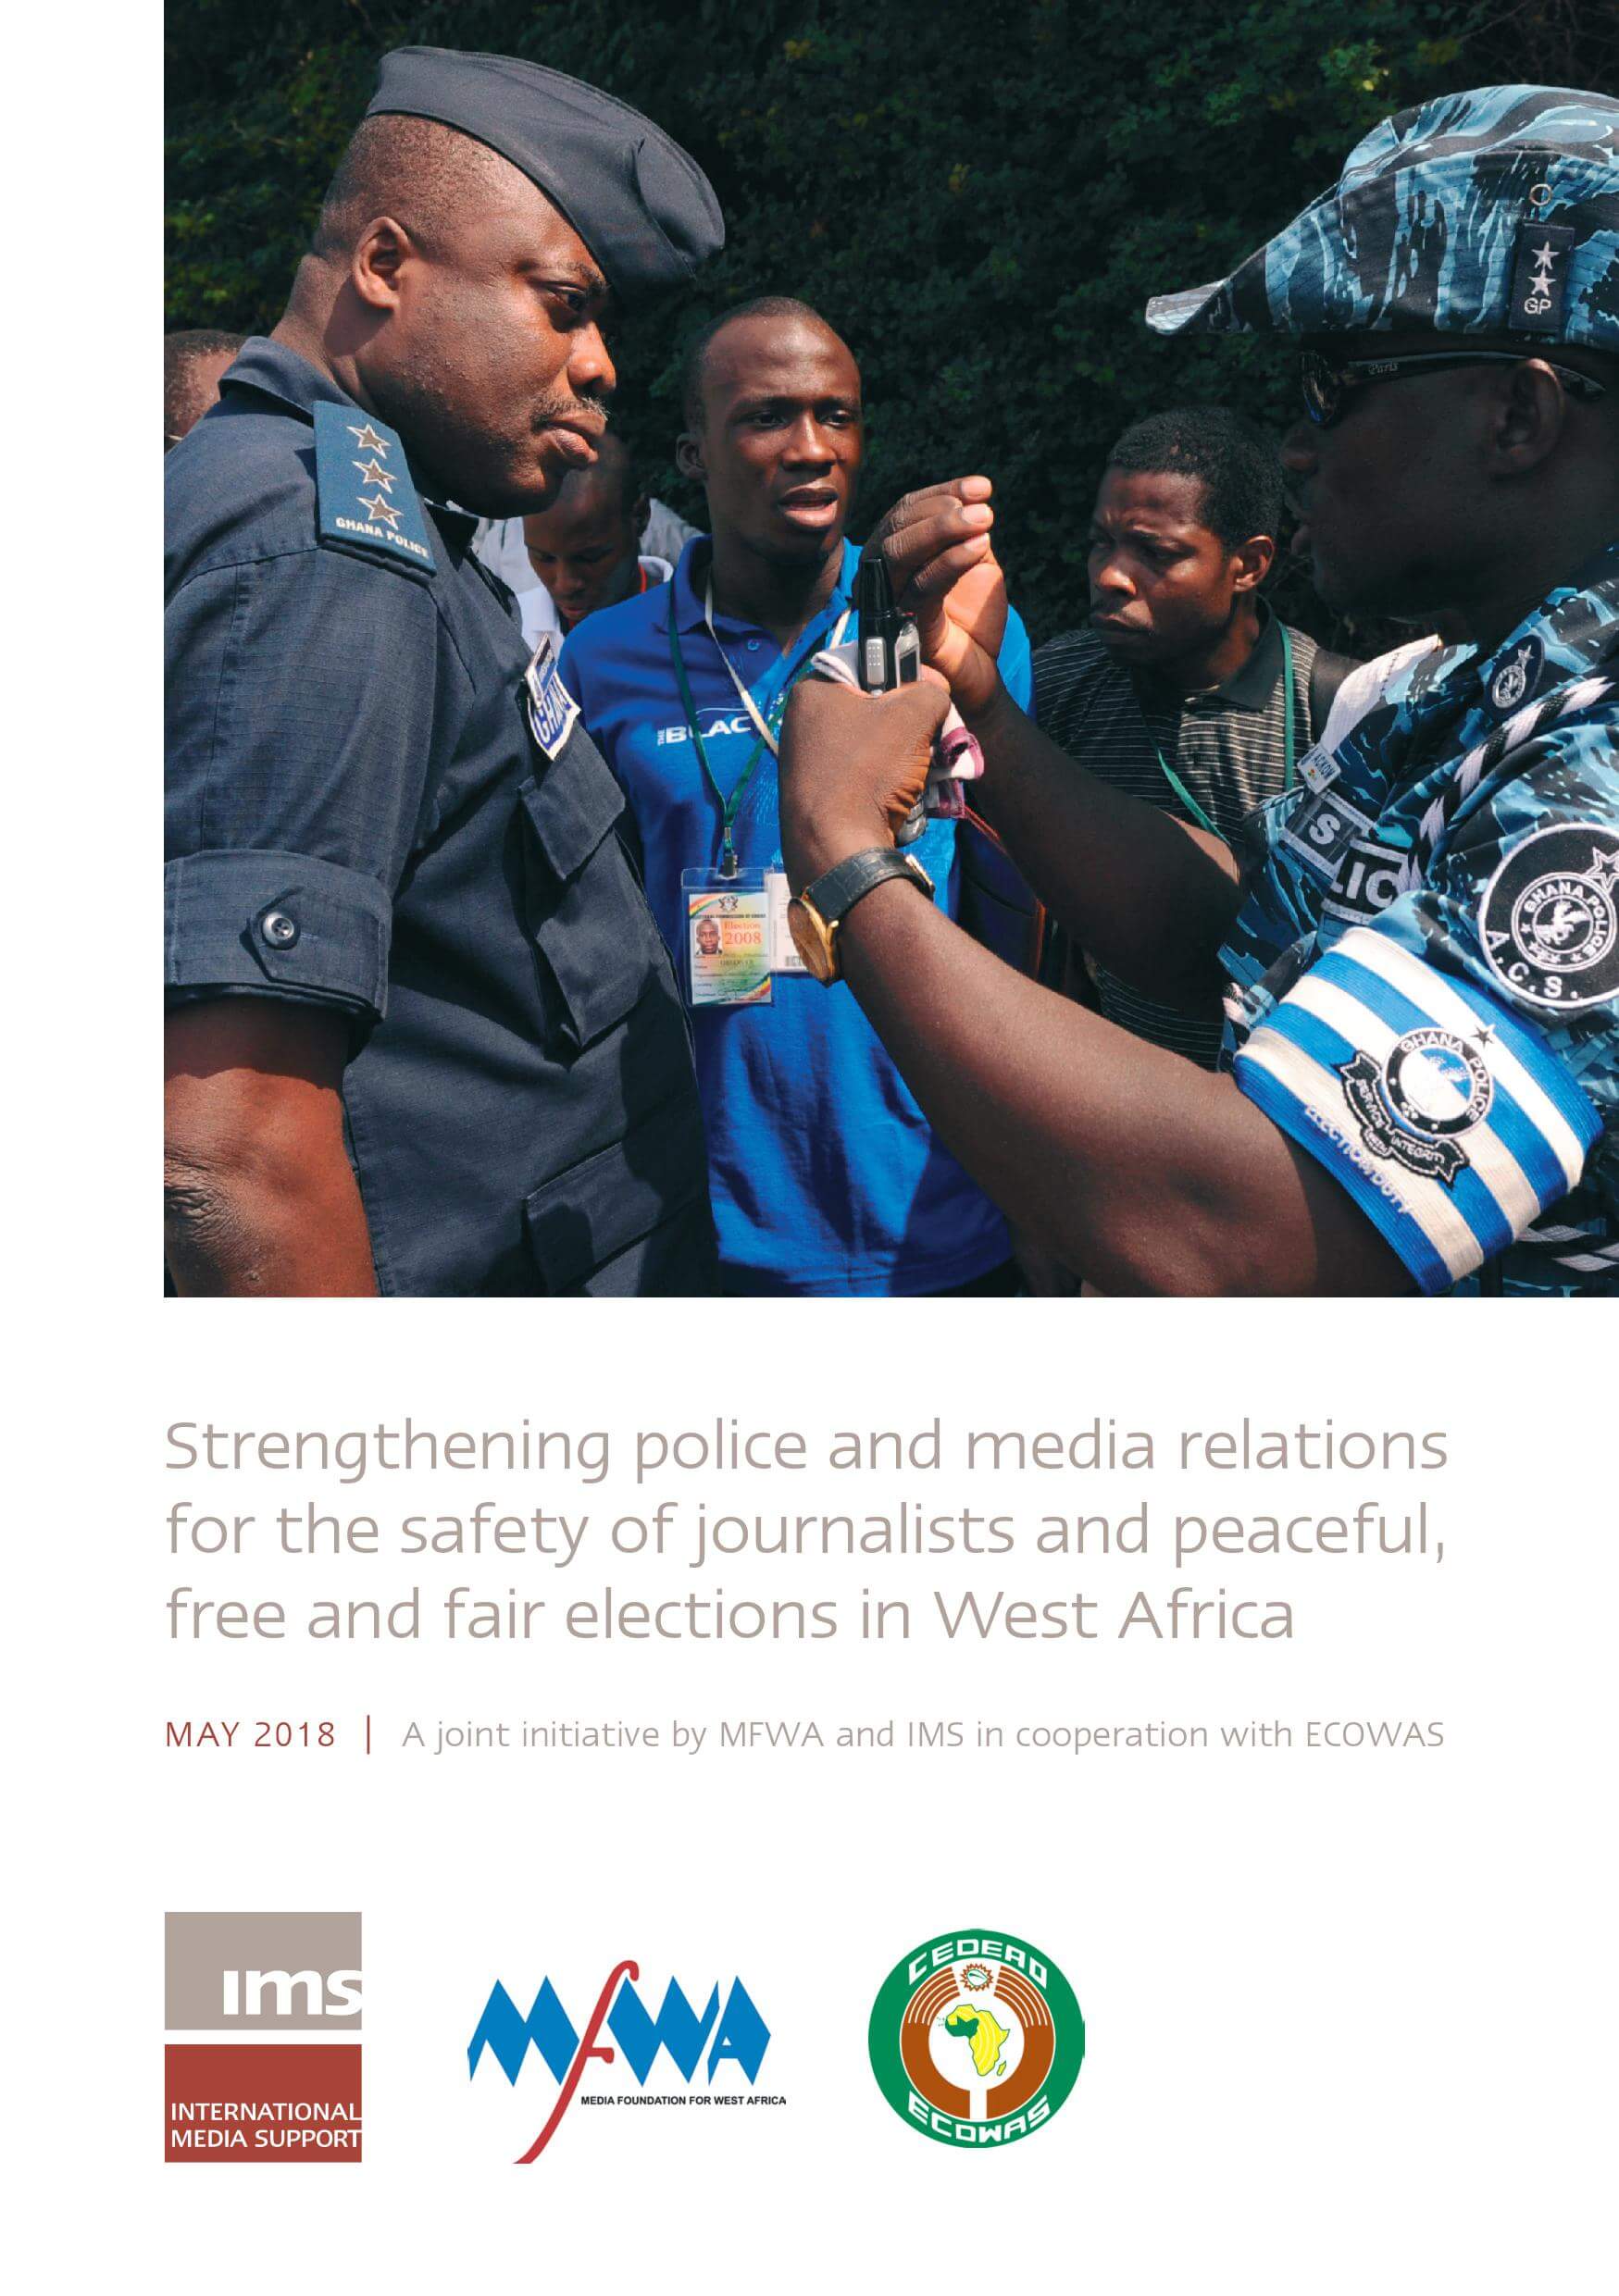 Strengthening media and police relations for the safety of journalists and free and fair elections in West Africa